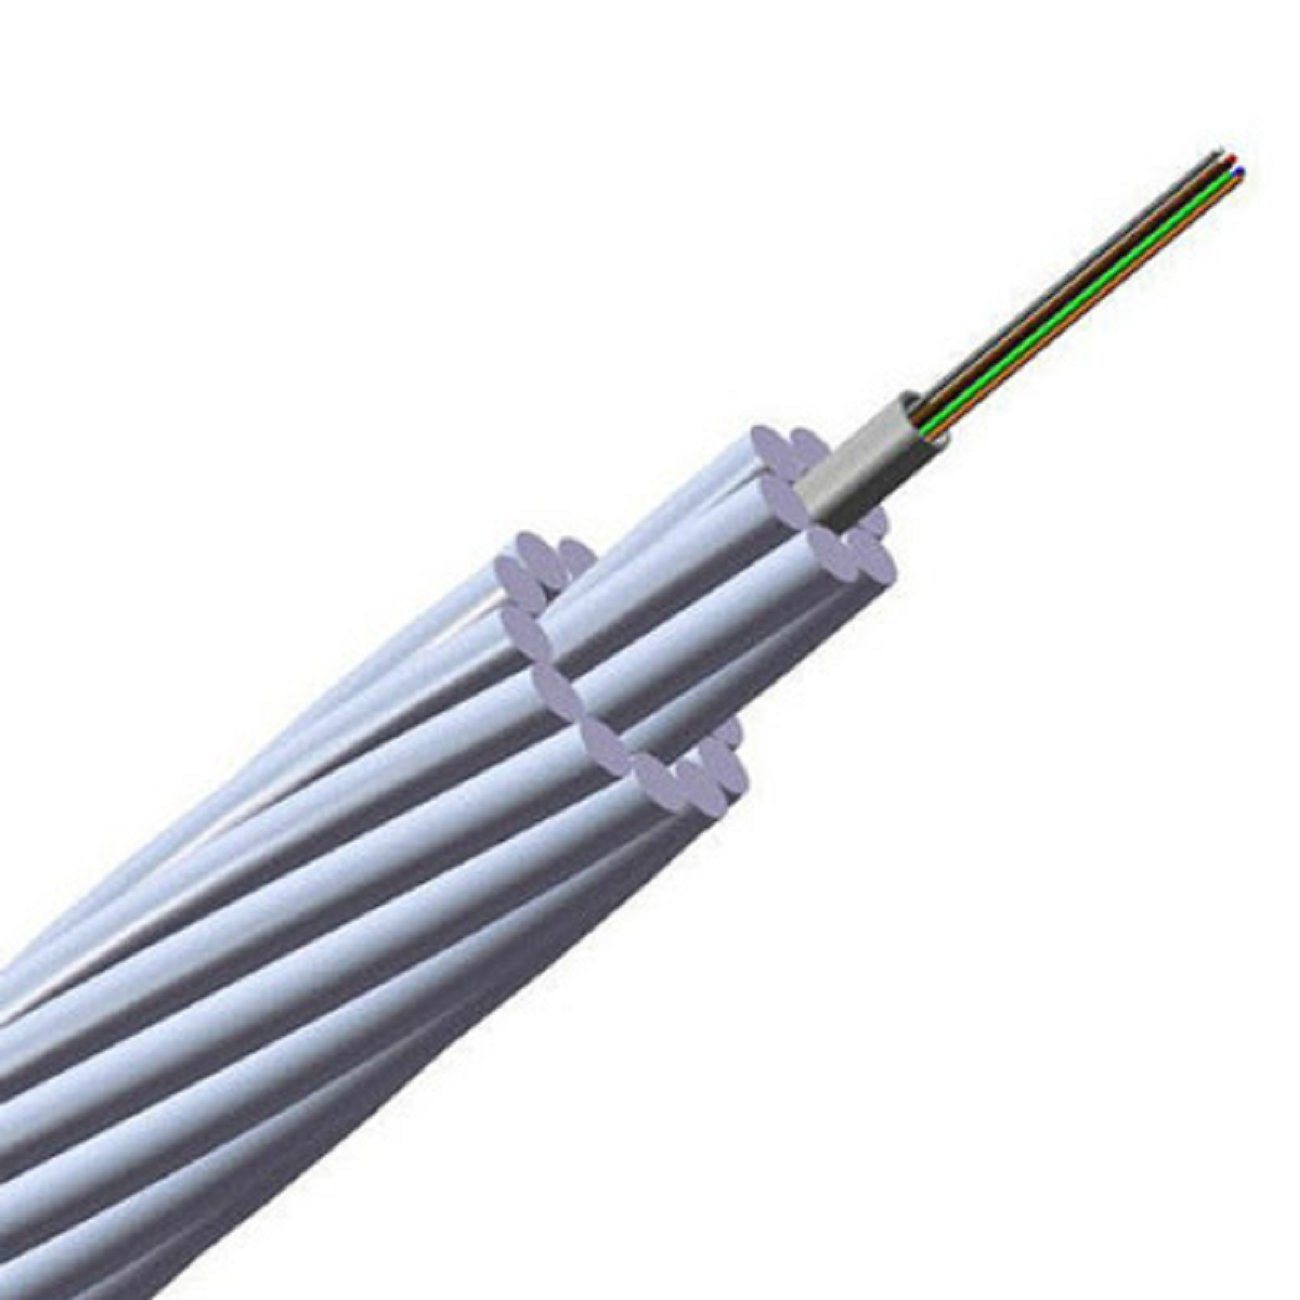 Opgw 24b1 Optical Fiber Composite Ground Opgw Cable